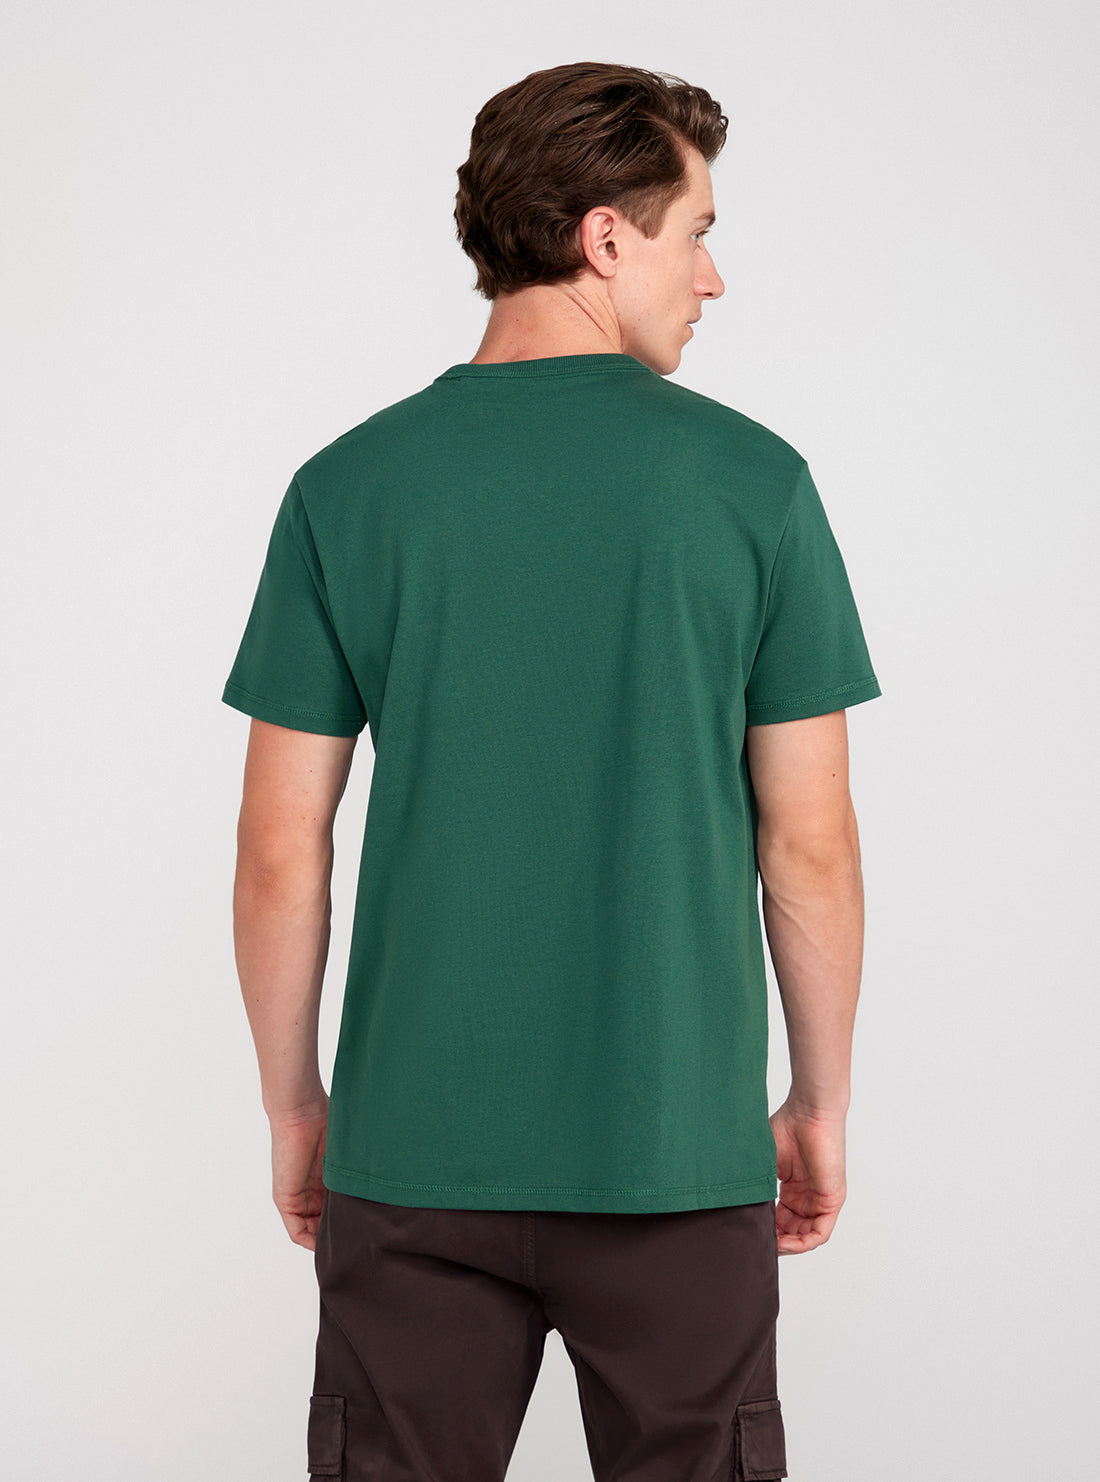 GUESS Green Short Sleeve Shaded Triangle T-Shirt back view